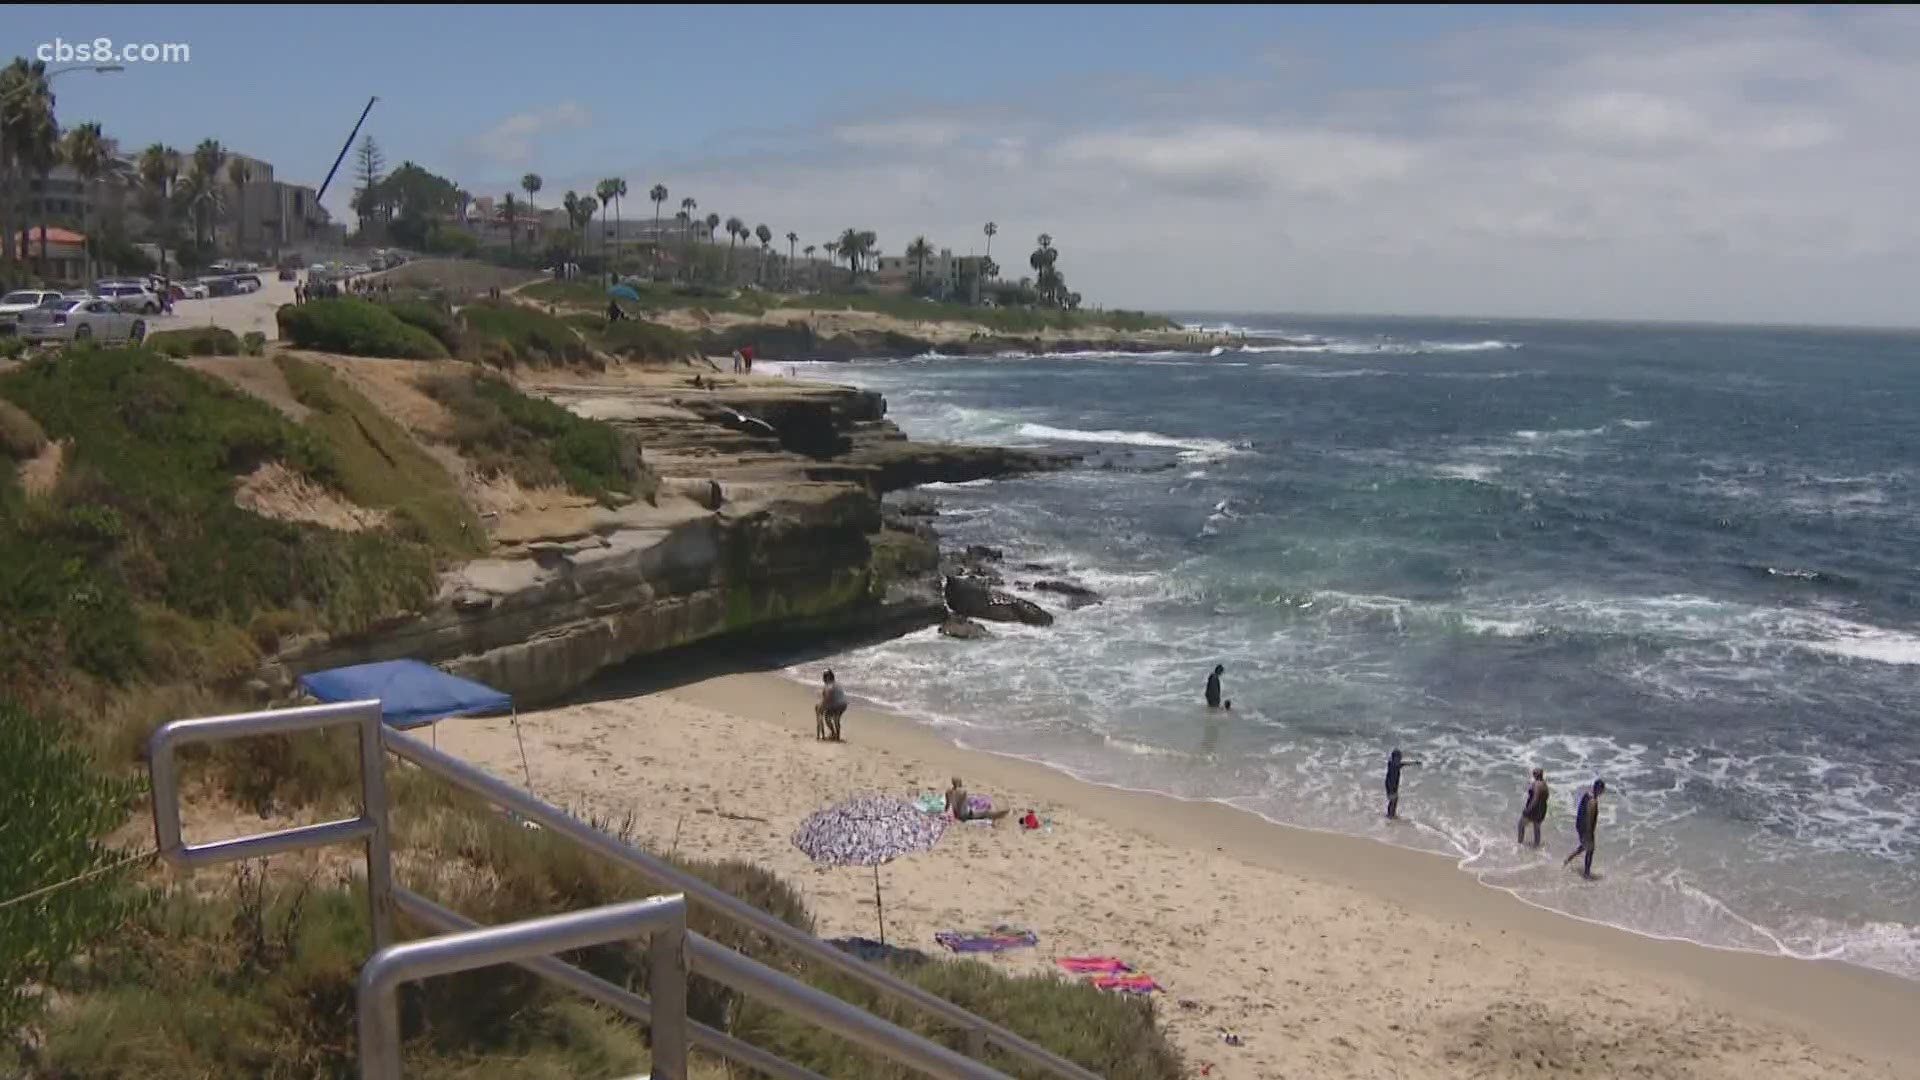 Pet rescues at the beach are adding to the mounting calls San Diego lifeguards are getting.